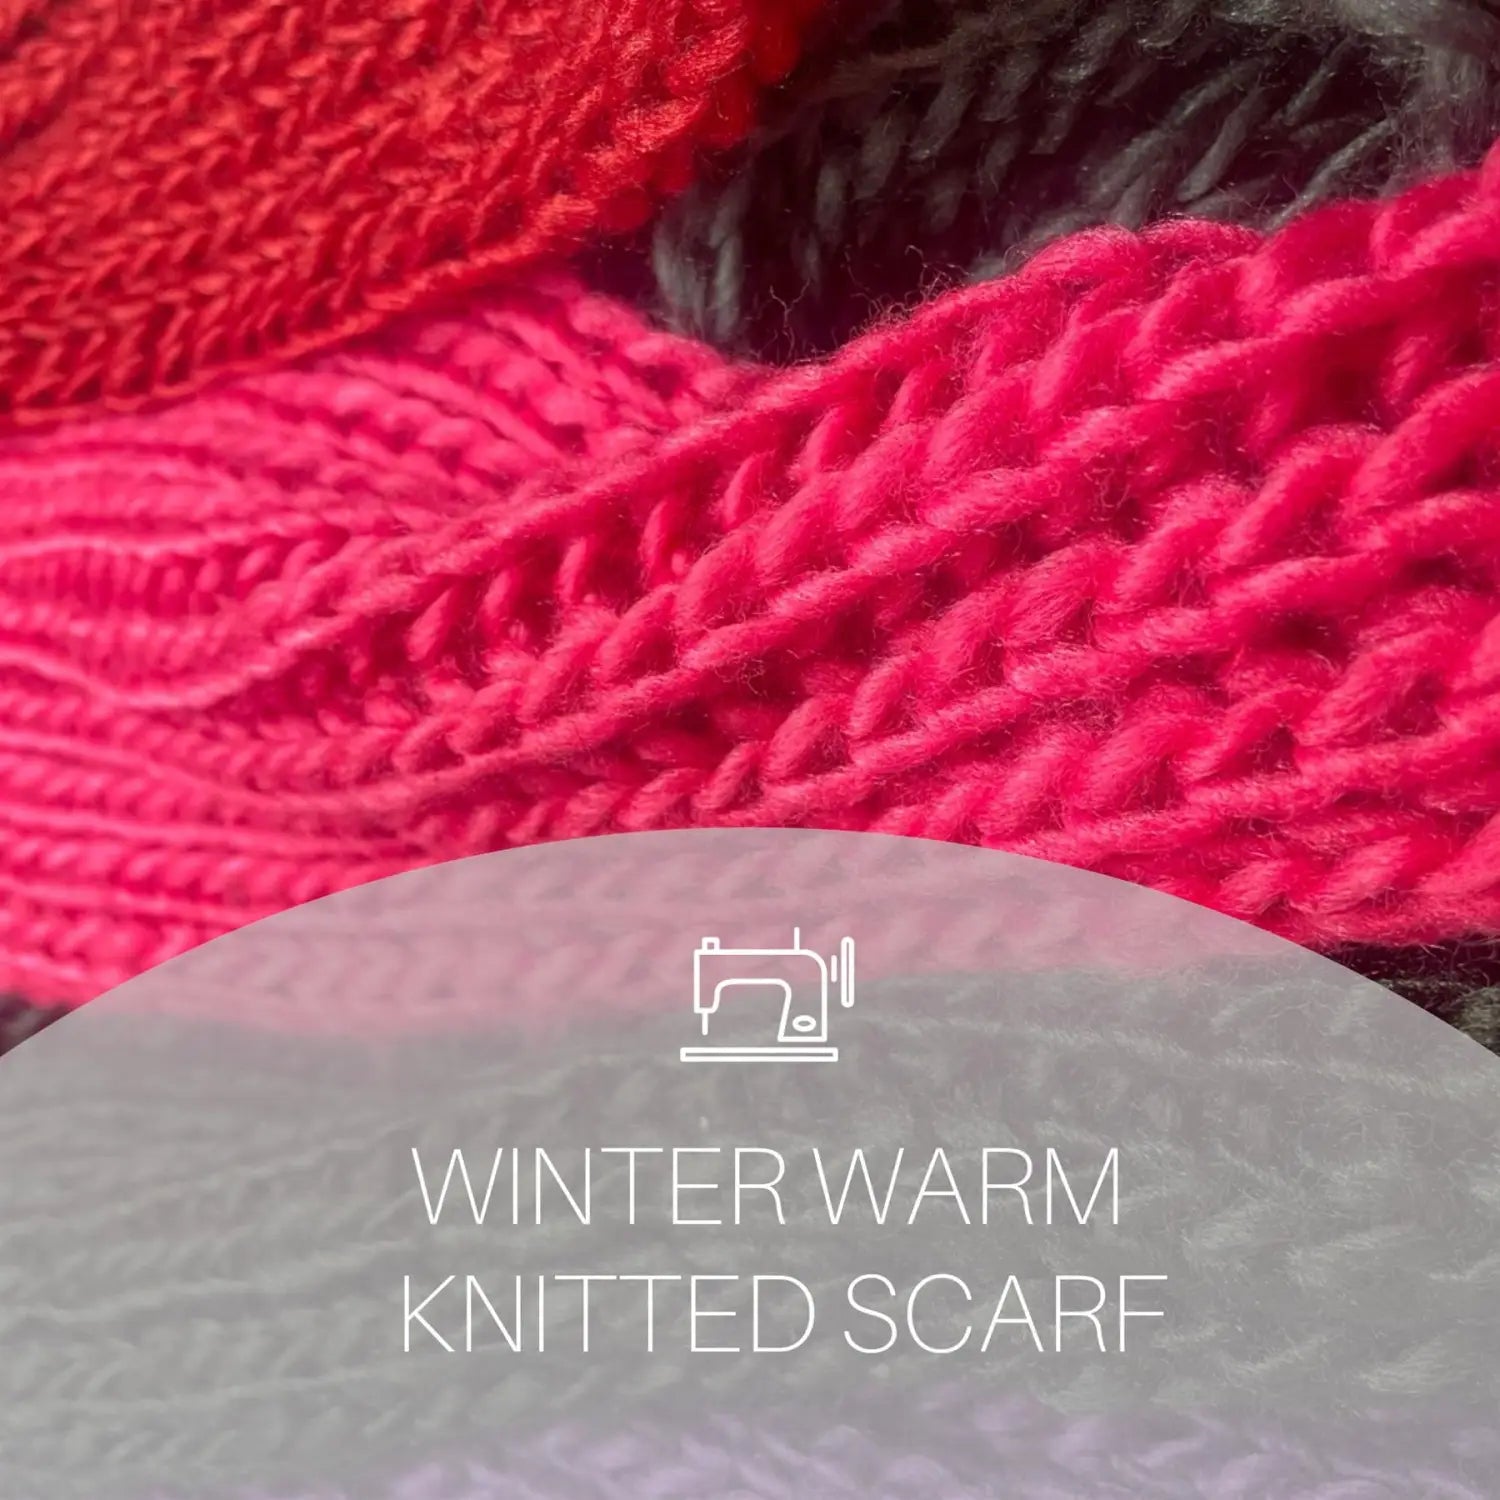 Chunky Bobble Knit Scarf in Red and Pink Yarn for Winter Warm Accessories